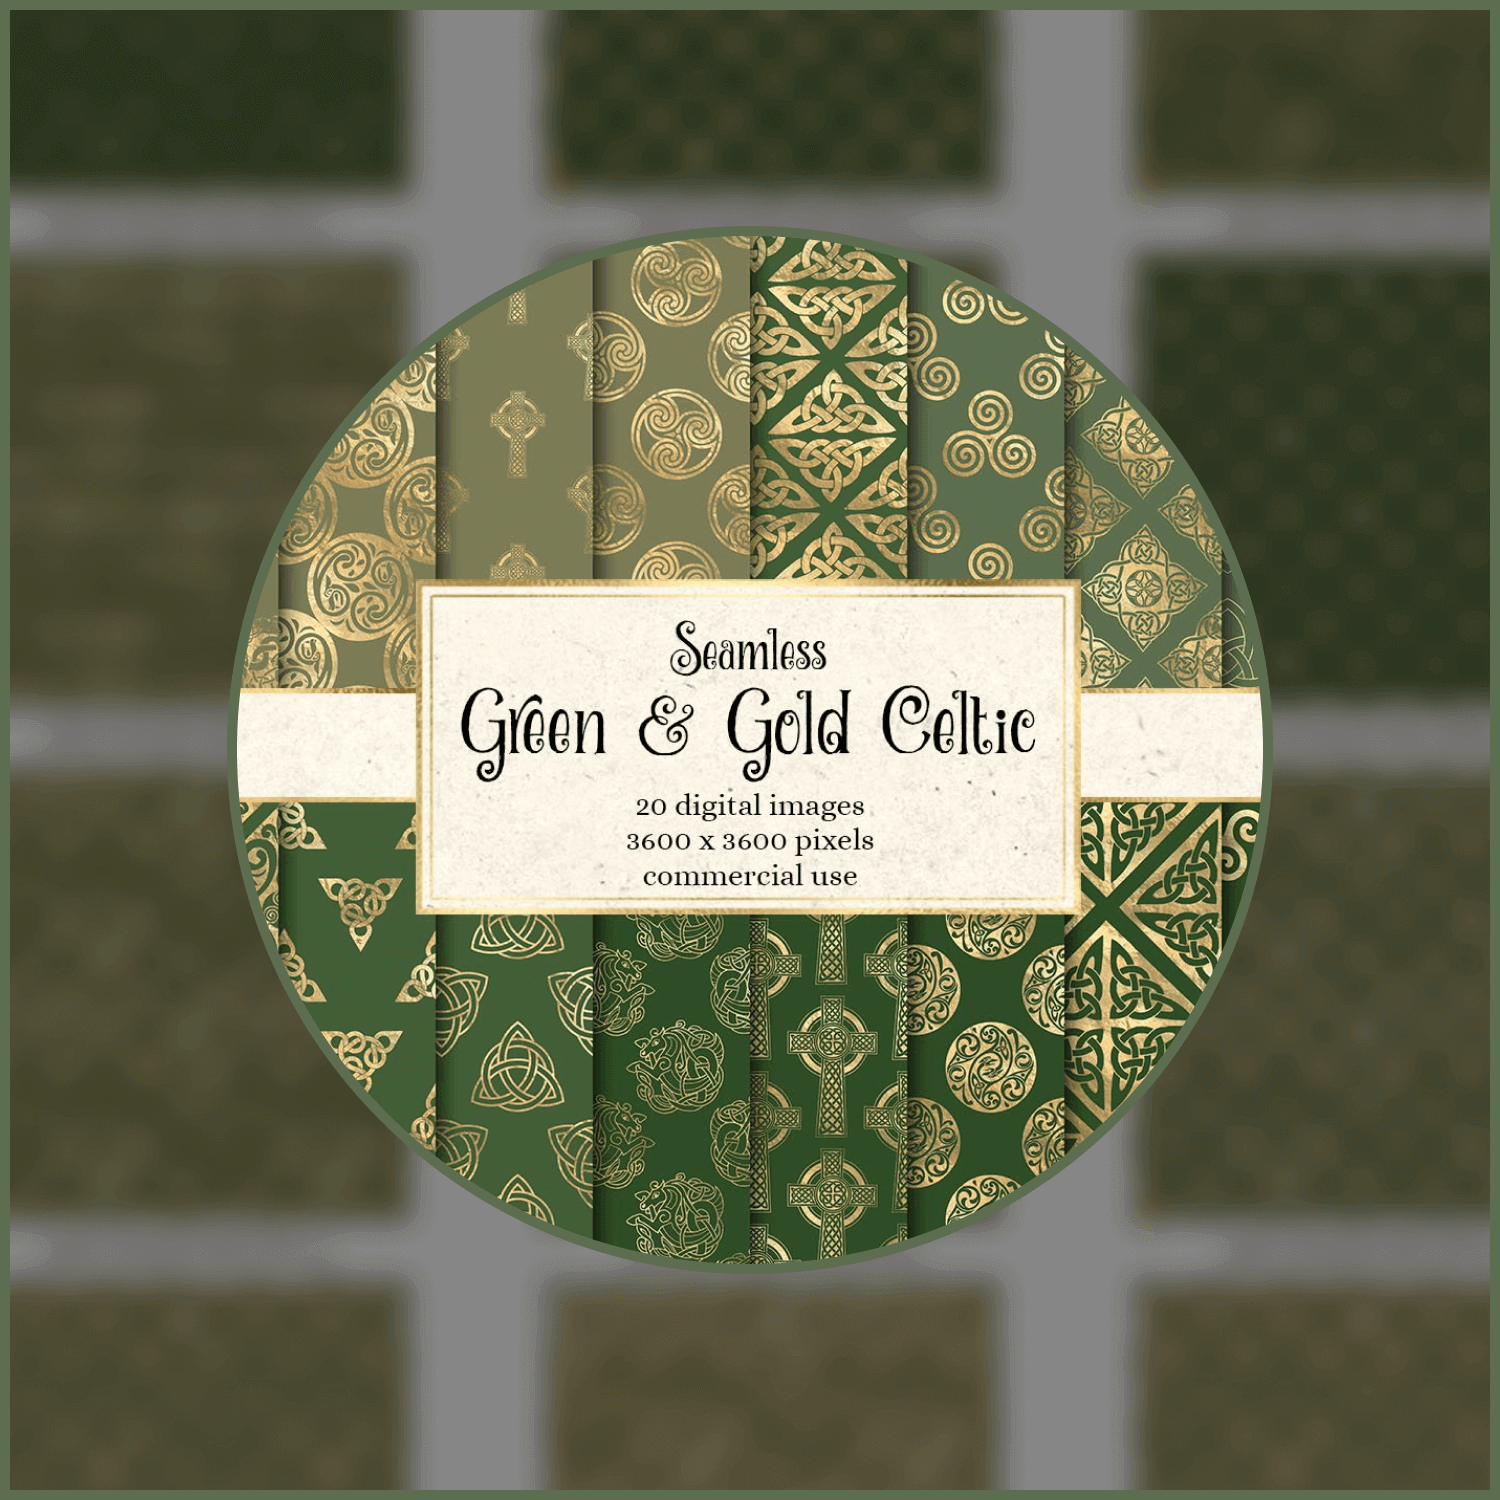 Green and Gold Celtic Digital Paper.